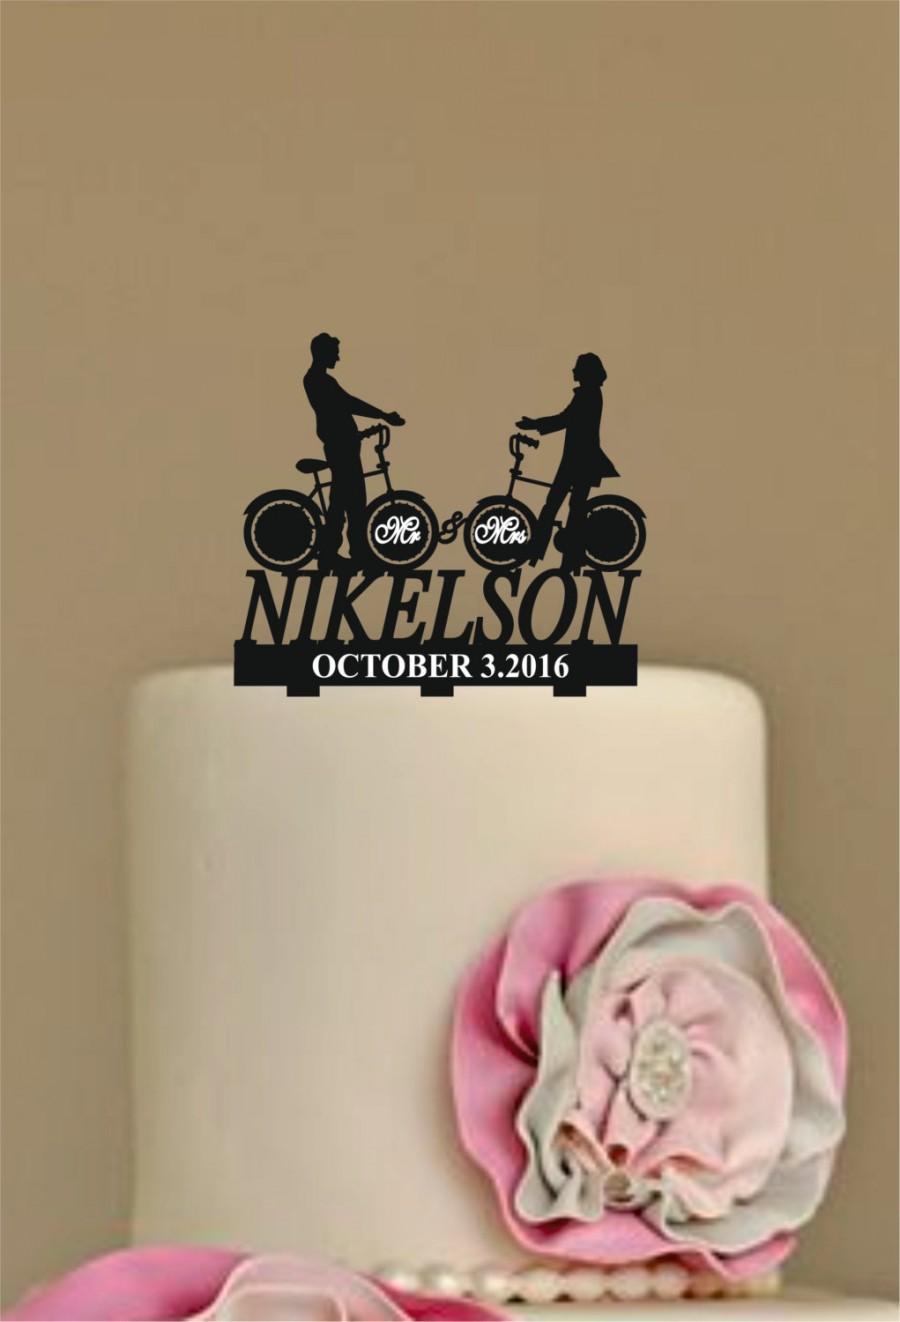 Wedding - Personalized Wedding Cake Topper,  Rustic Wedding Cake topper, funny wedding cake topper, unique wedding Cake Topper, bicycle silhouette